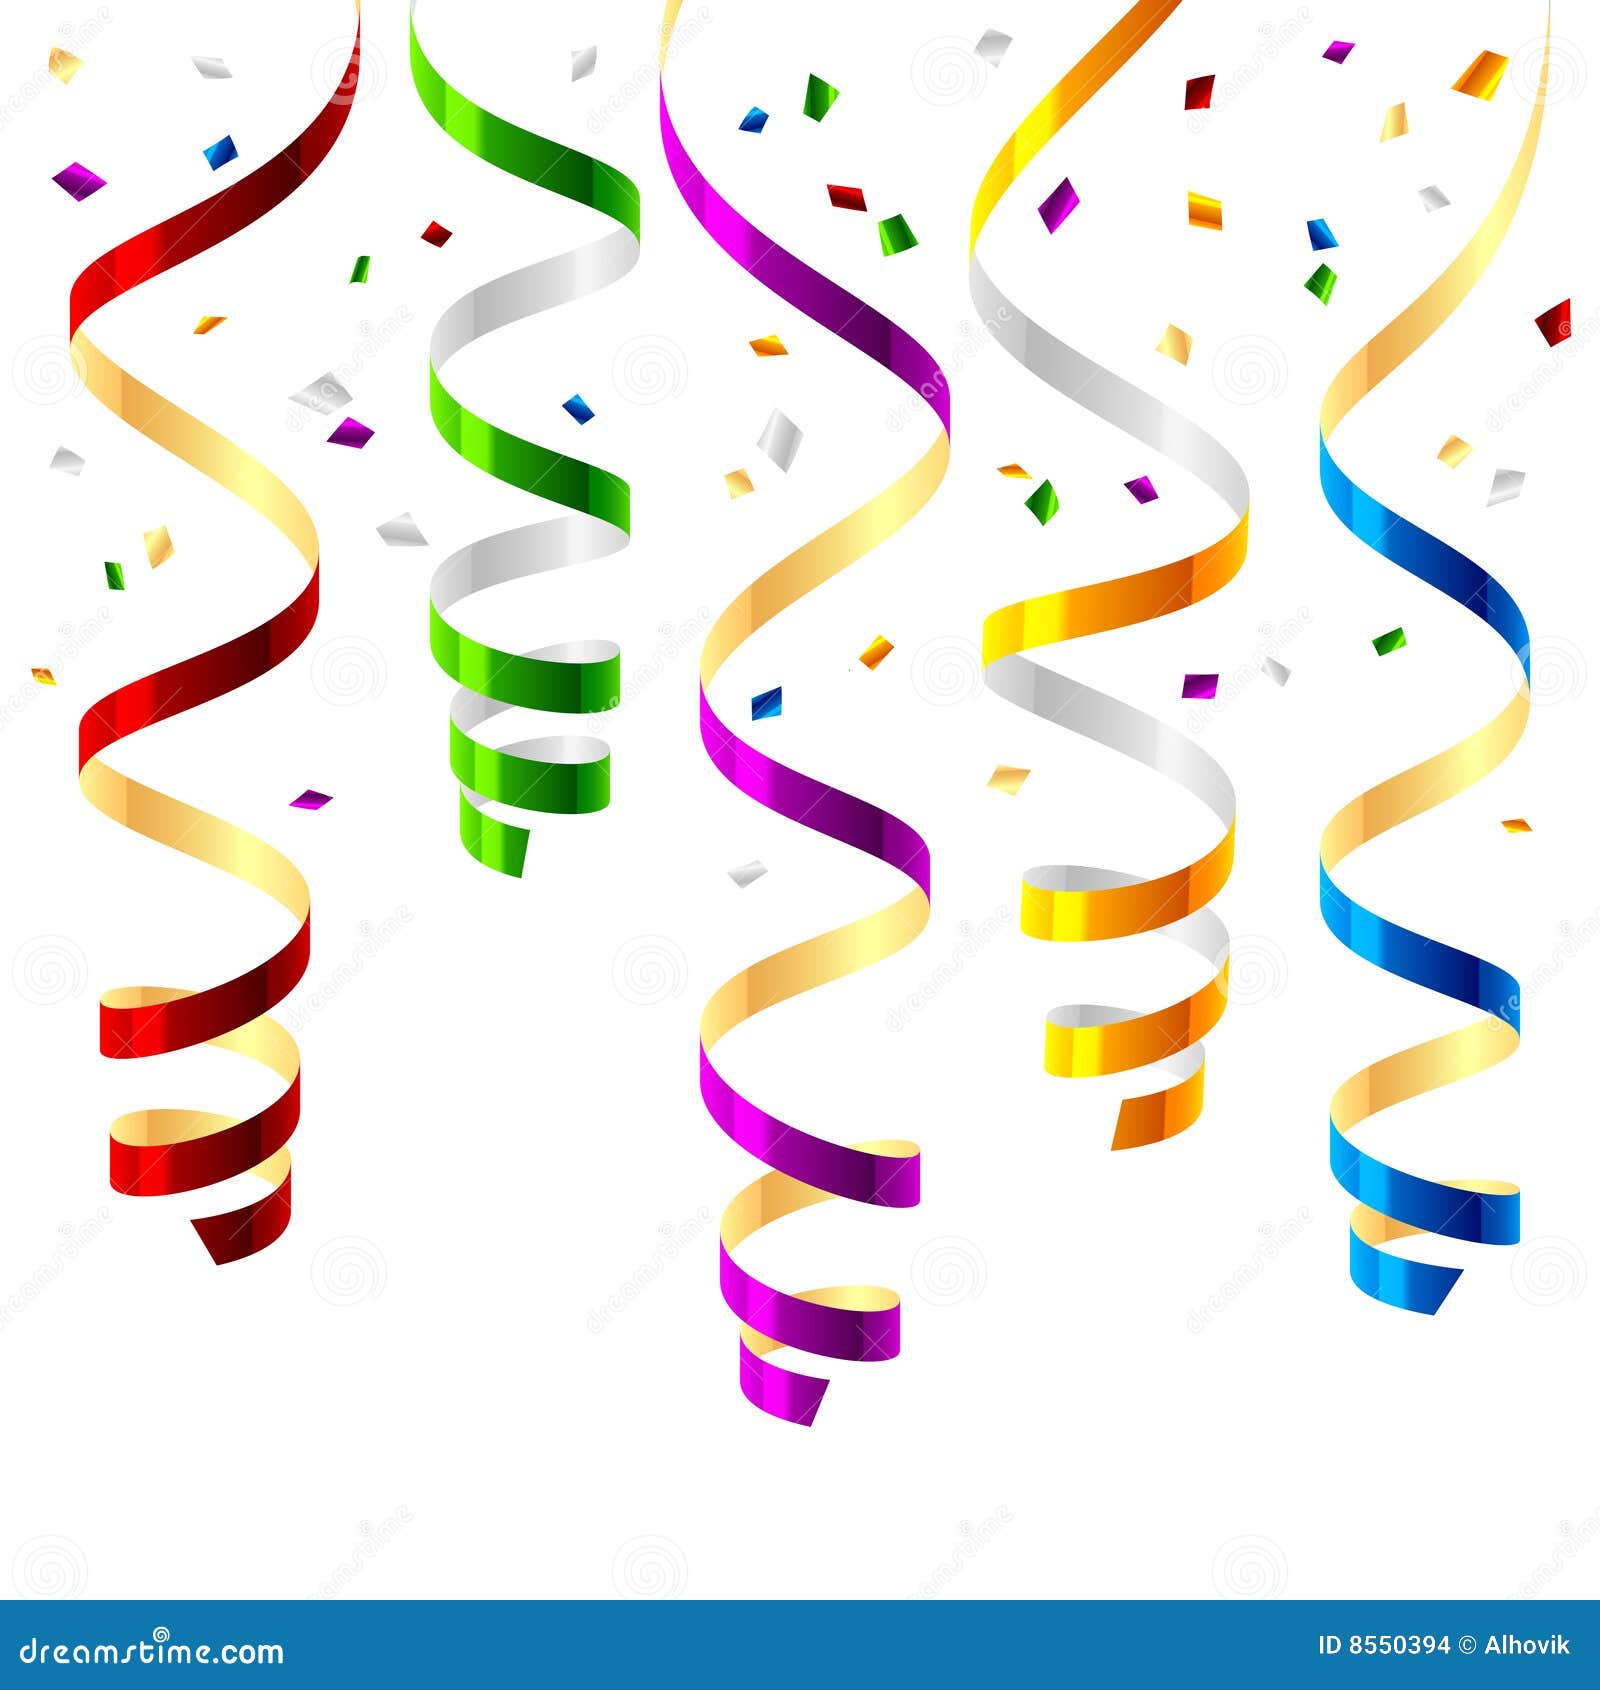 clip art balloons and streamers - photo #11